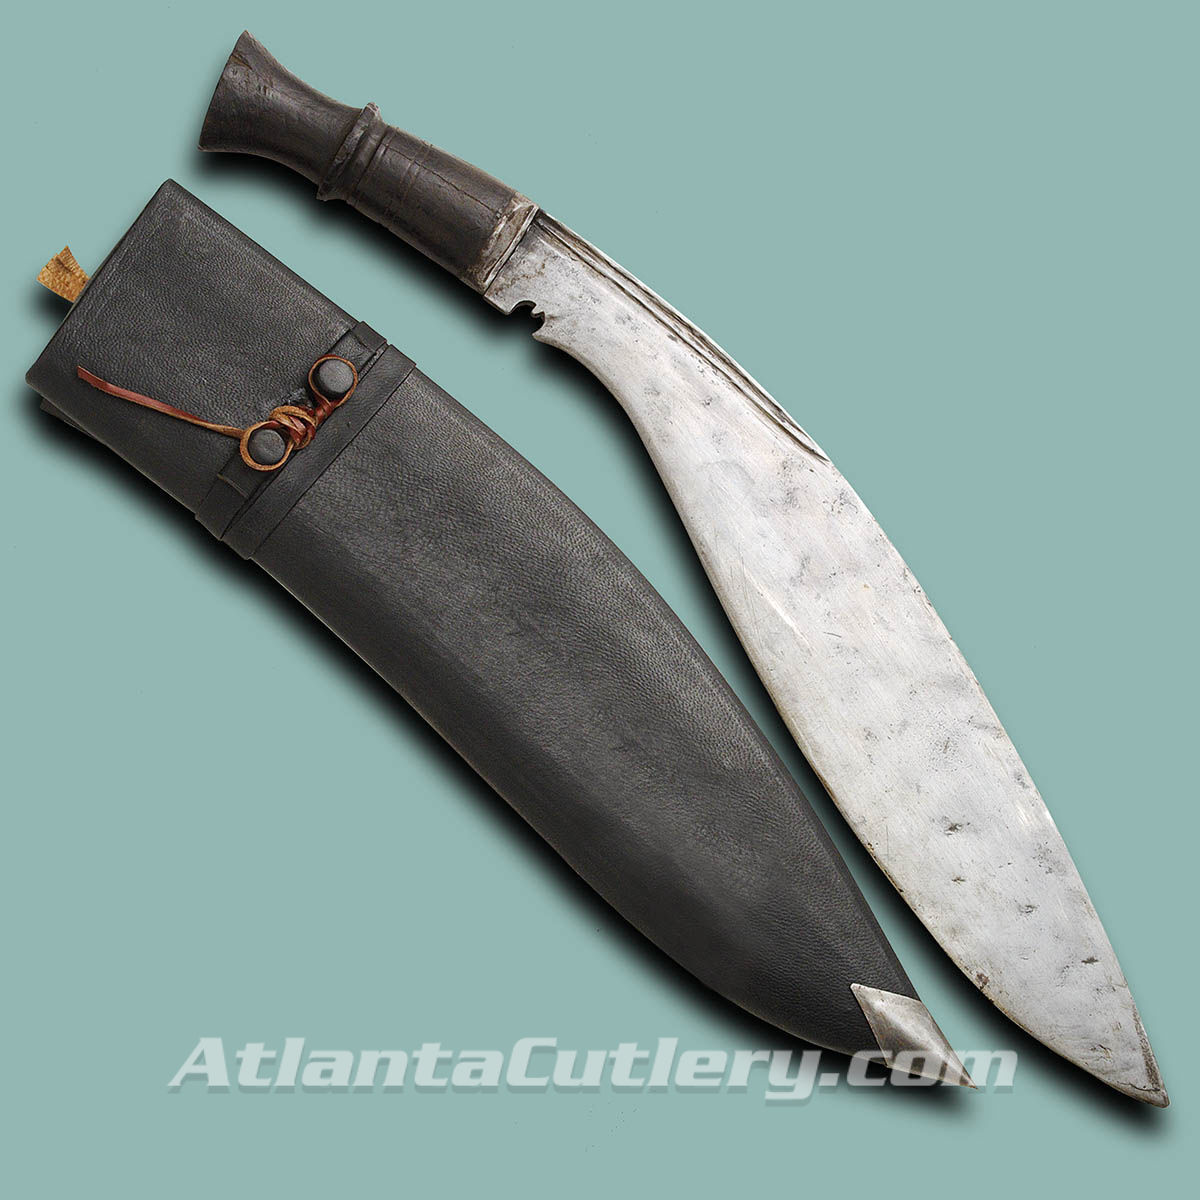 Antique Longleaf Traditional Kukri with Reproduction Scabbard